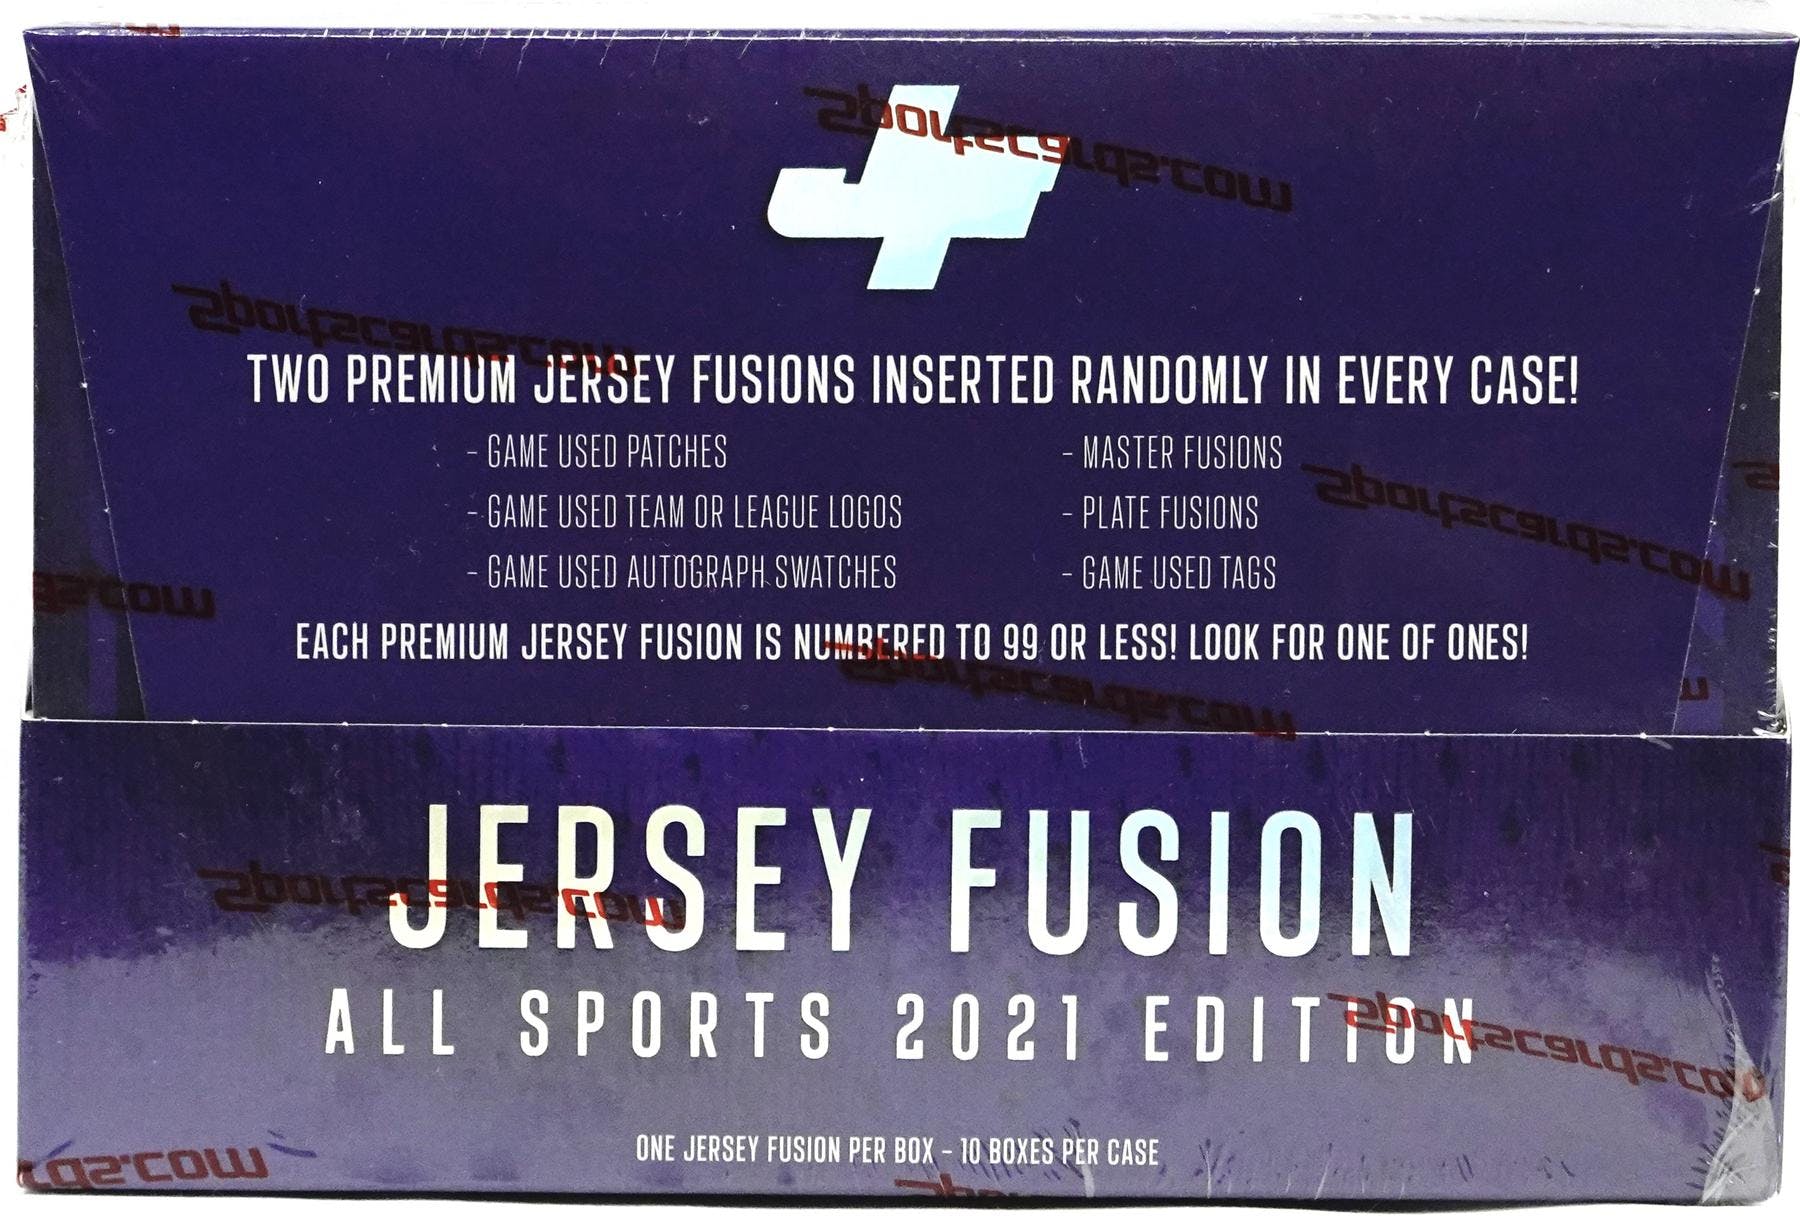 2021 JERSEY FUSION ALL SPORTS EDITION DISPLAY CASE - 10 JERSEY FUSIONS PER CASE